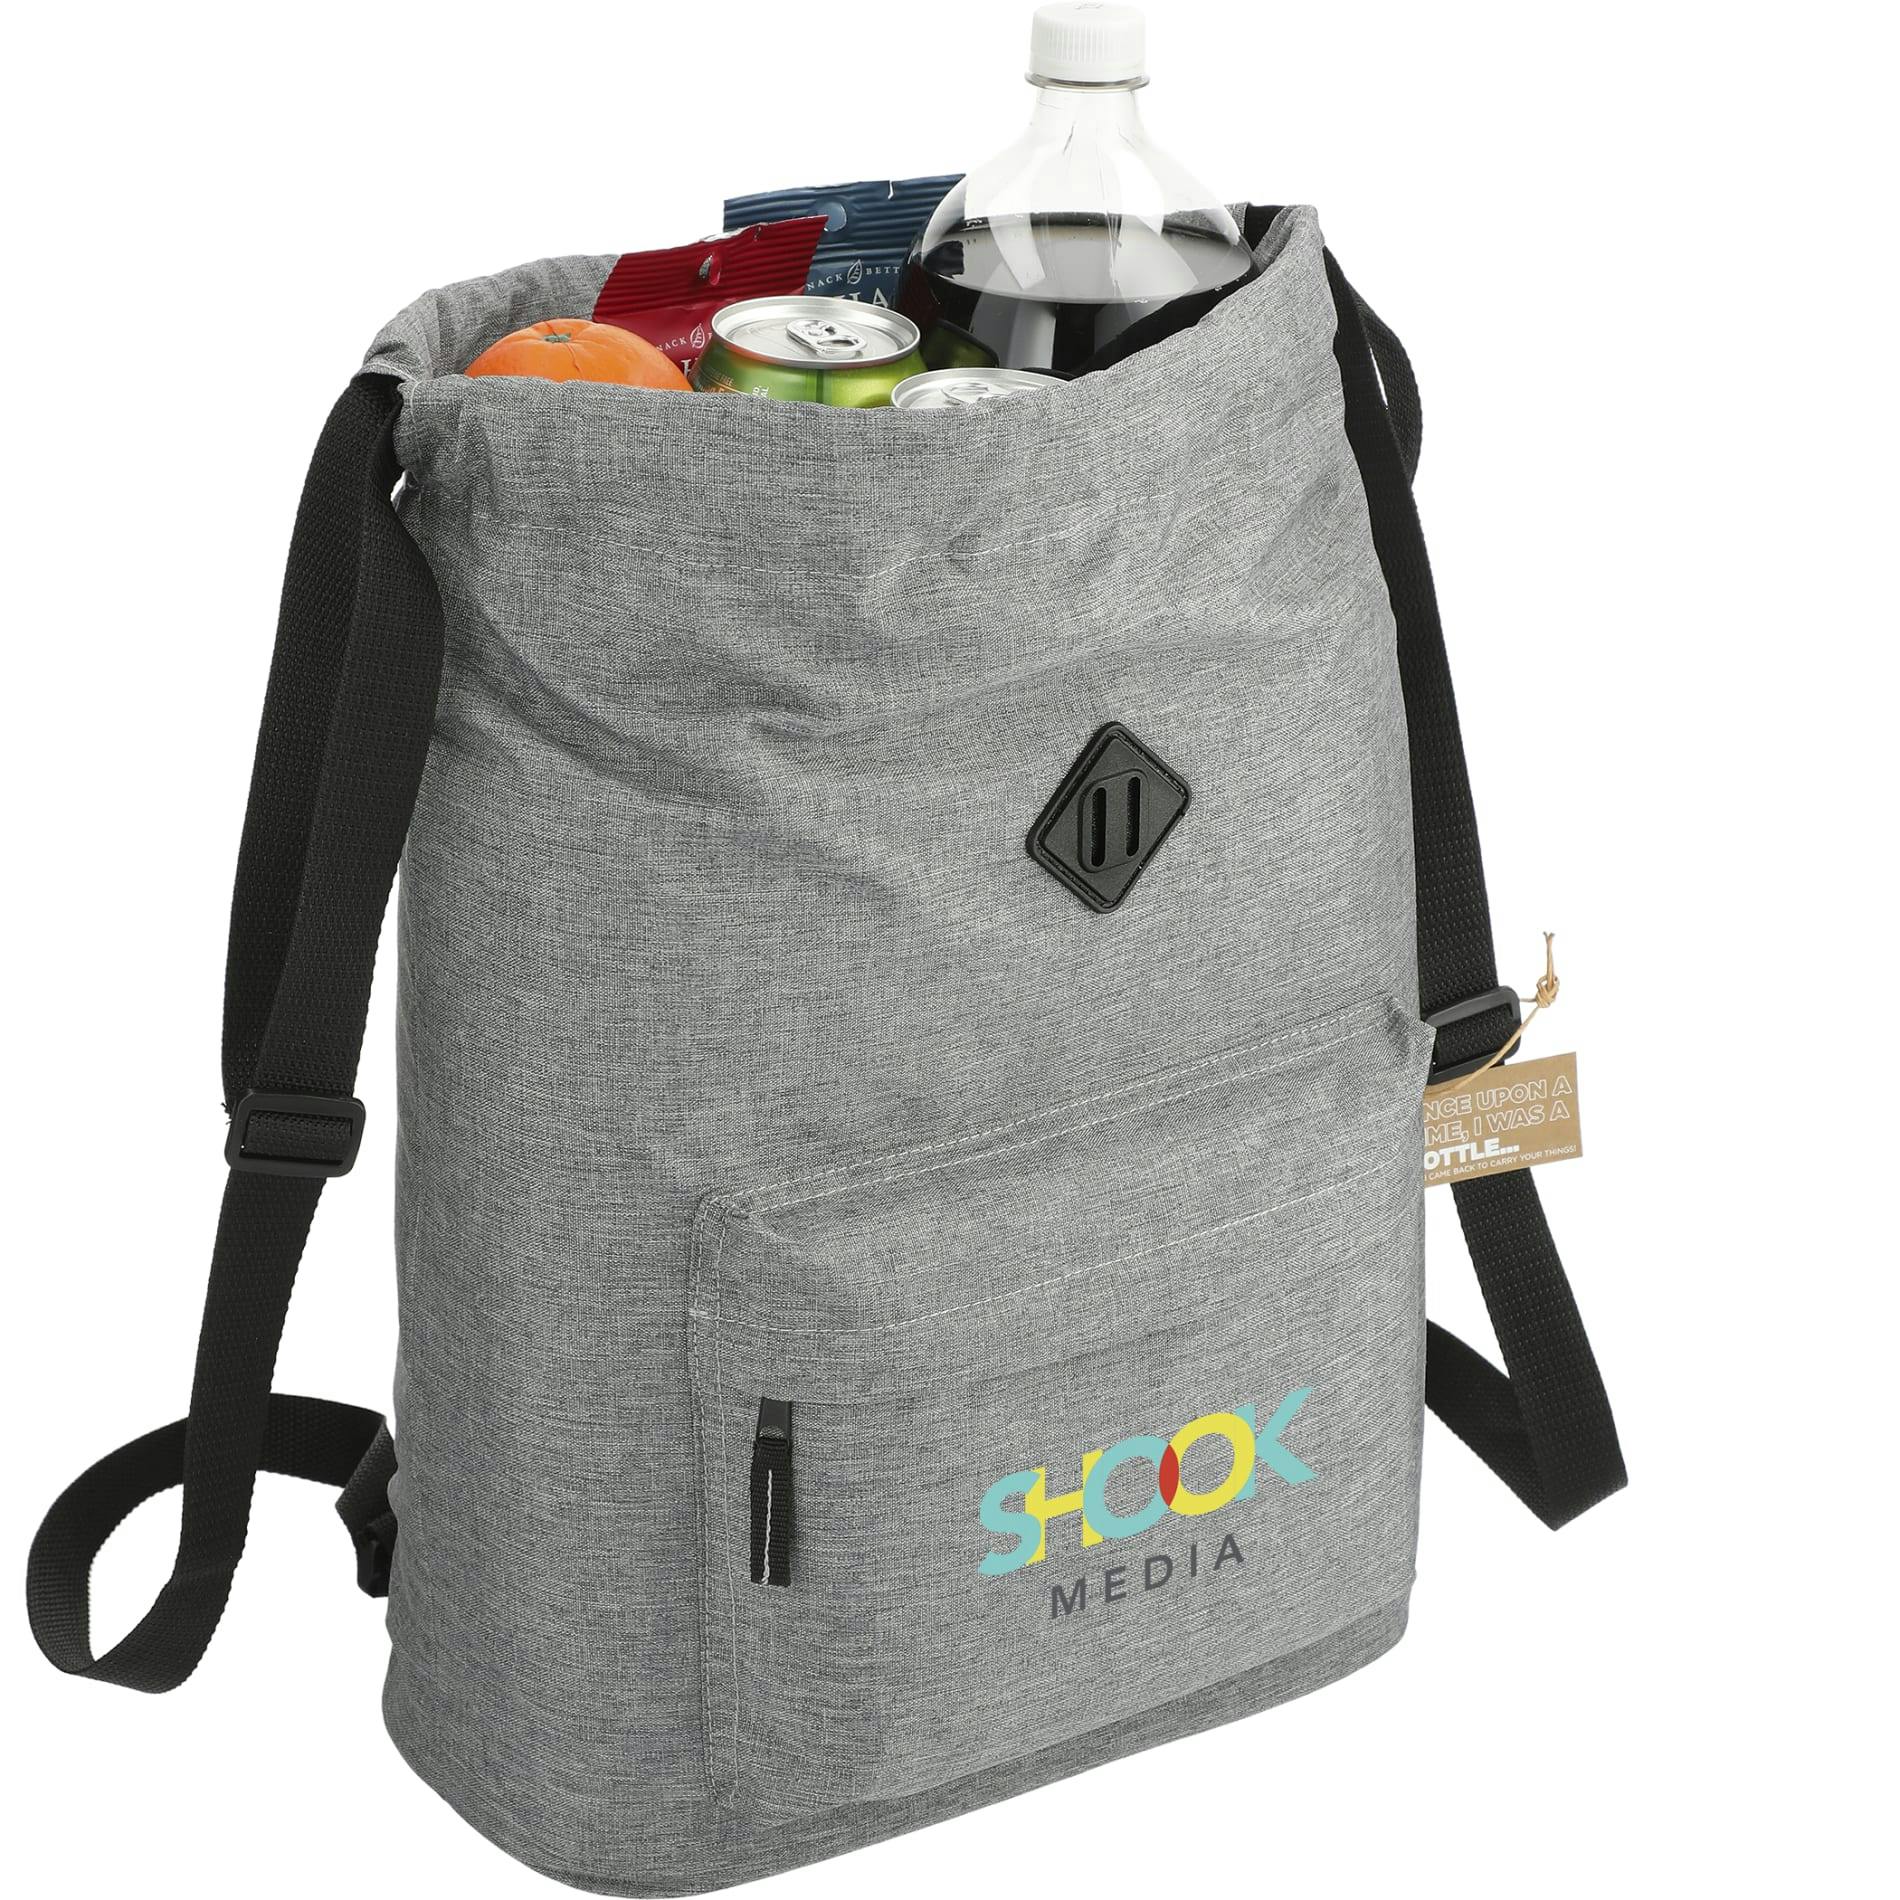 Essentials Recycled Insulated Drawstring - additional Image 5